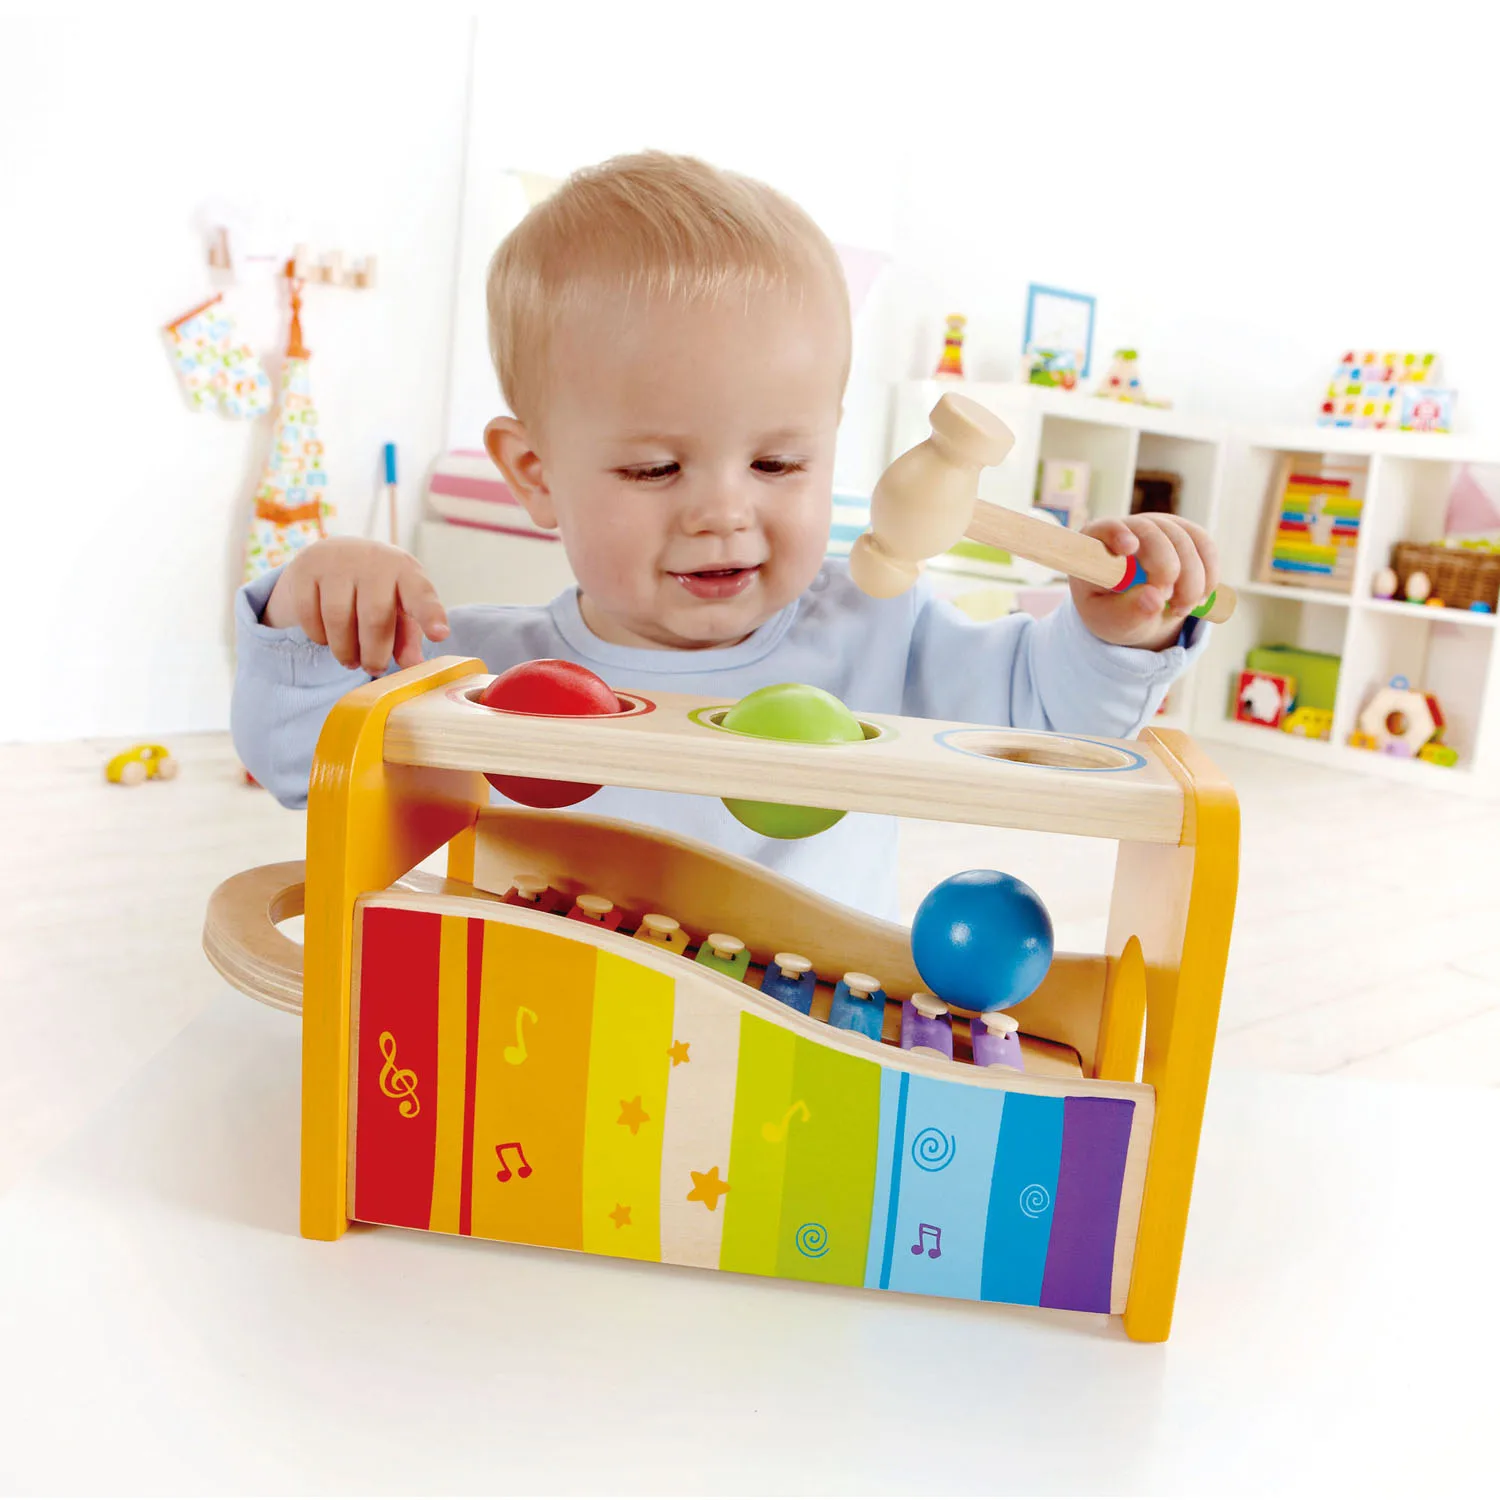 Hot sell Cheap educational custom xylophone kid toy